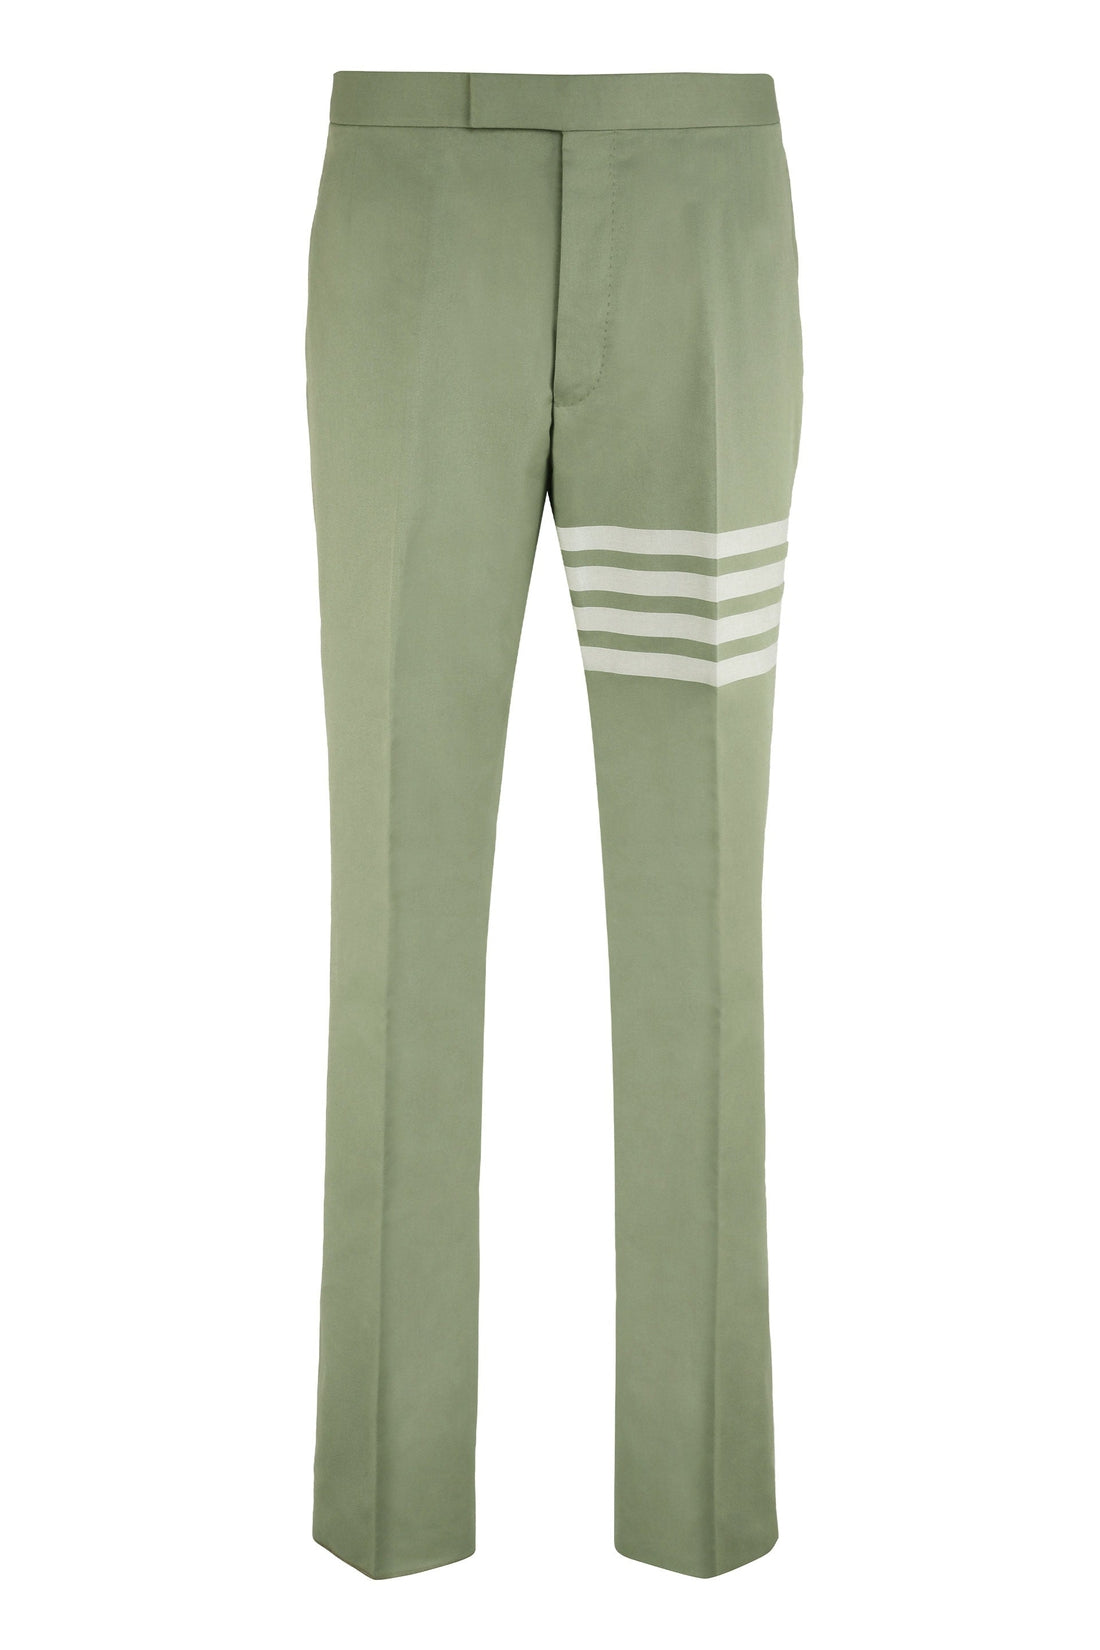 Thom Browne-OUTLET-SALE-Cotton chino trousers-ARCHIVIST